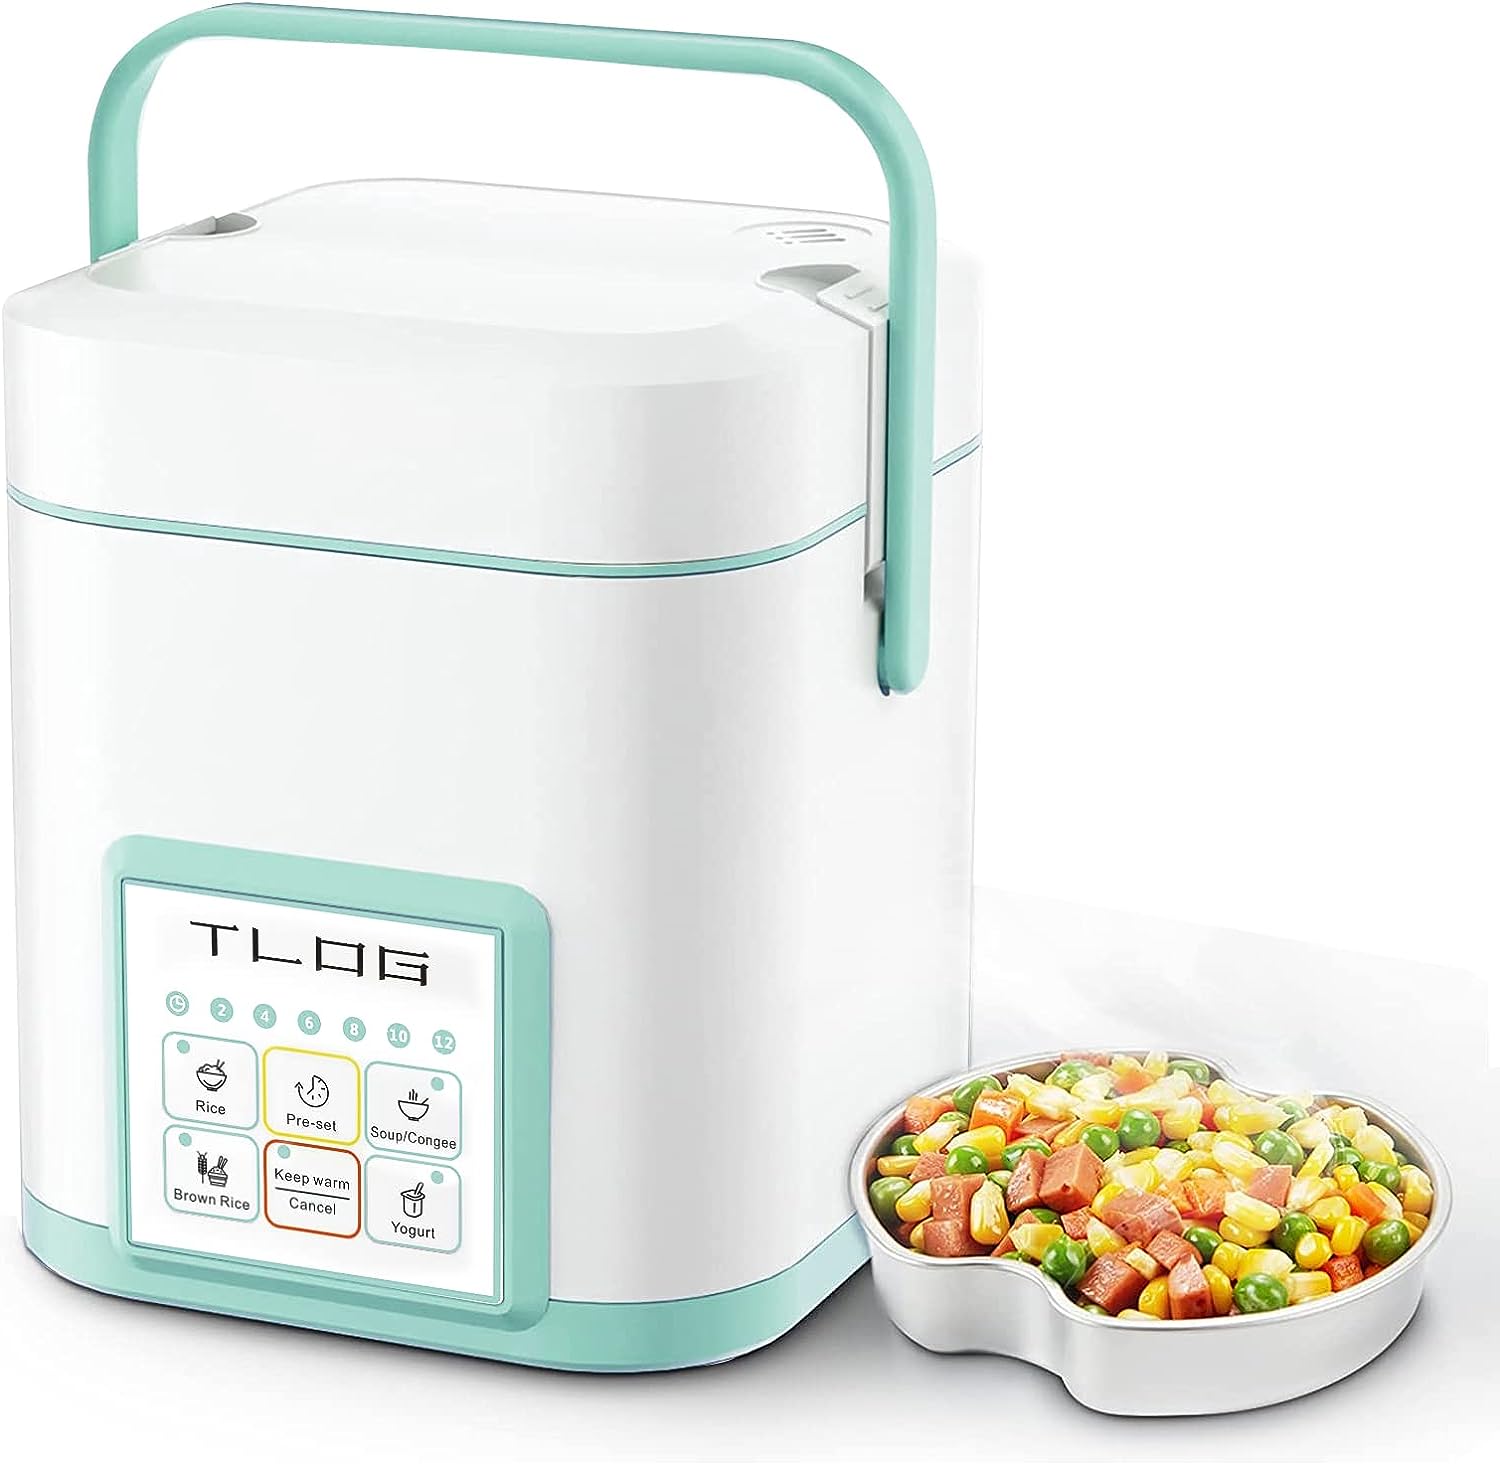 https://bigbigmart.com/wp-content/uploads/2023/08/TLOG-Mini-Rice-Cooker-2.5-Cups-Uncooked-Healthy-Ceramic-Coating-Portable-Rice-Cooker-1.2L-Travel-Rice-Cooker-Small-for-1-3-People-Personal-Rice-maker-Food-Steamer.jpg